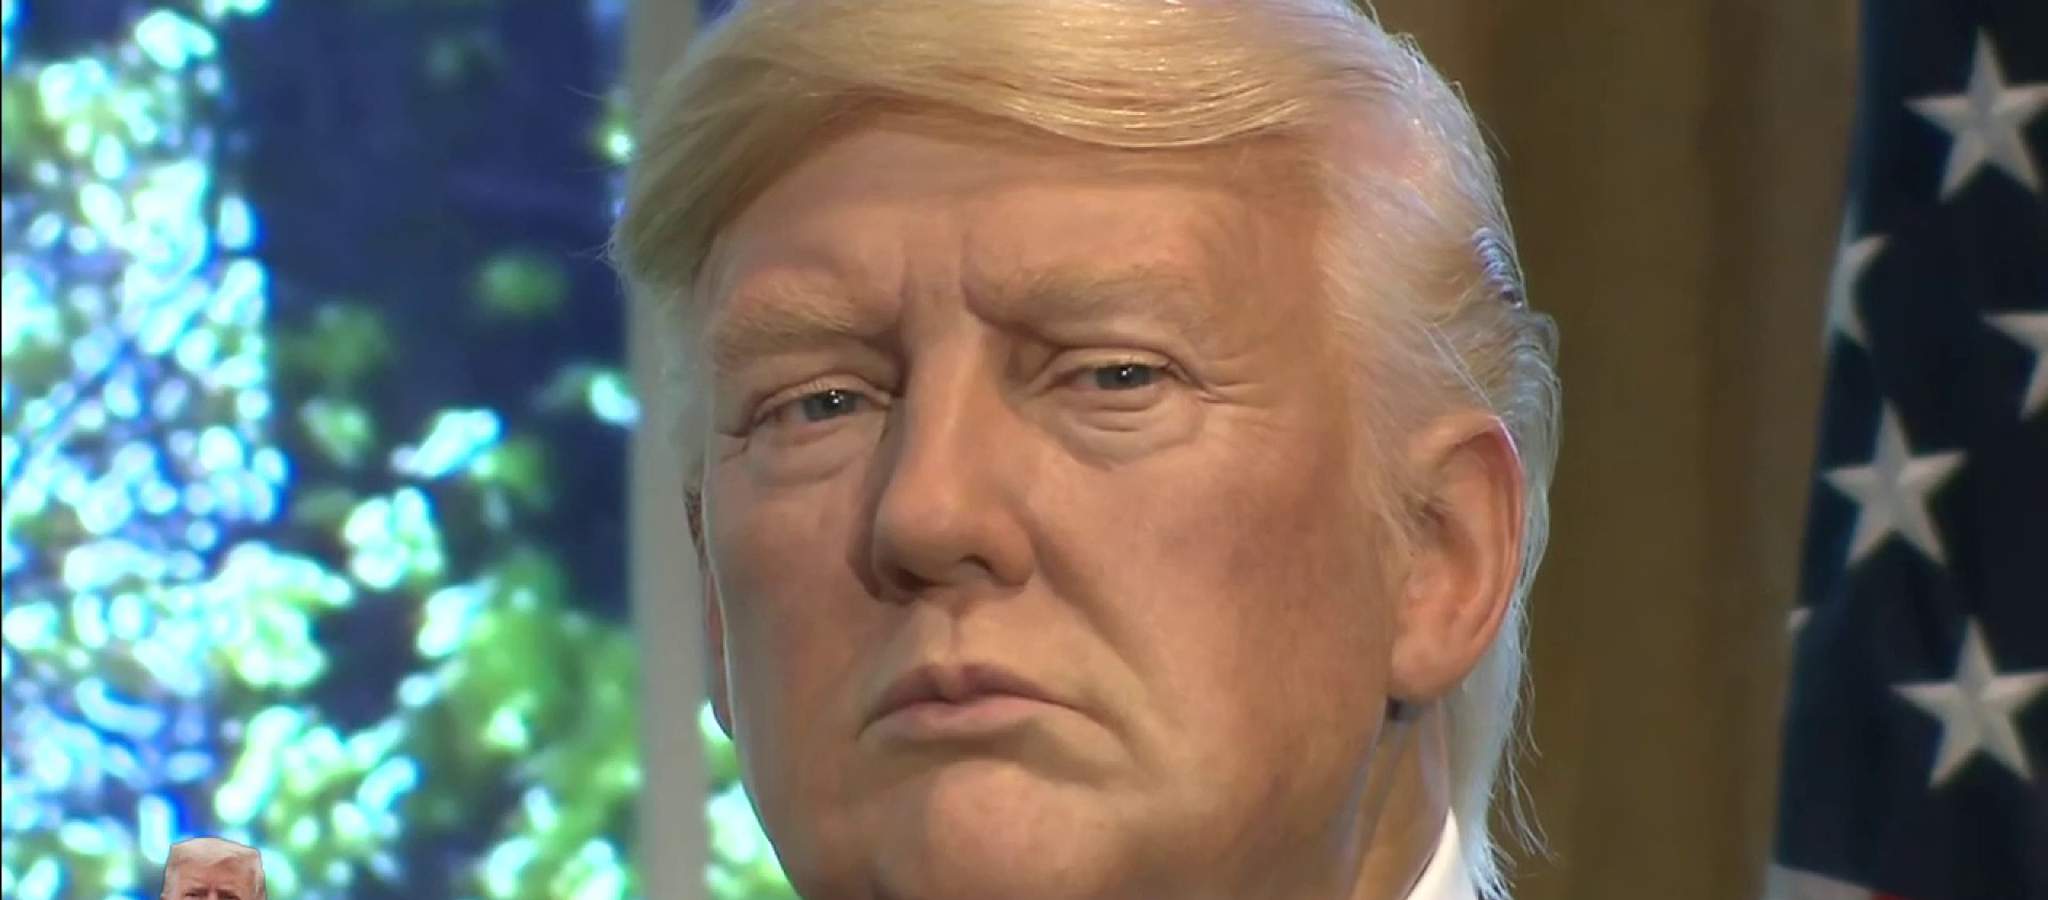 Wax museum removes Donald Trump likeness for repair after it is beaten, scratched